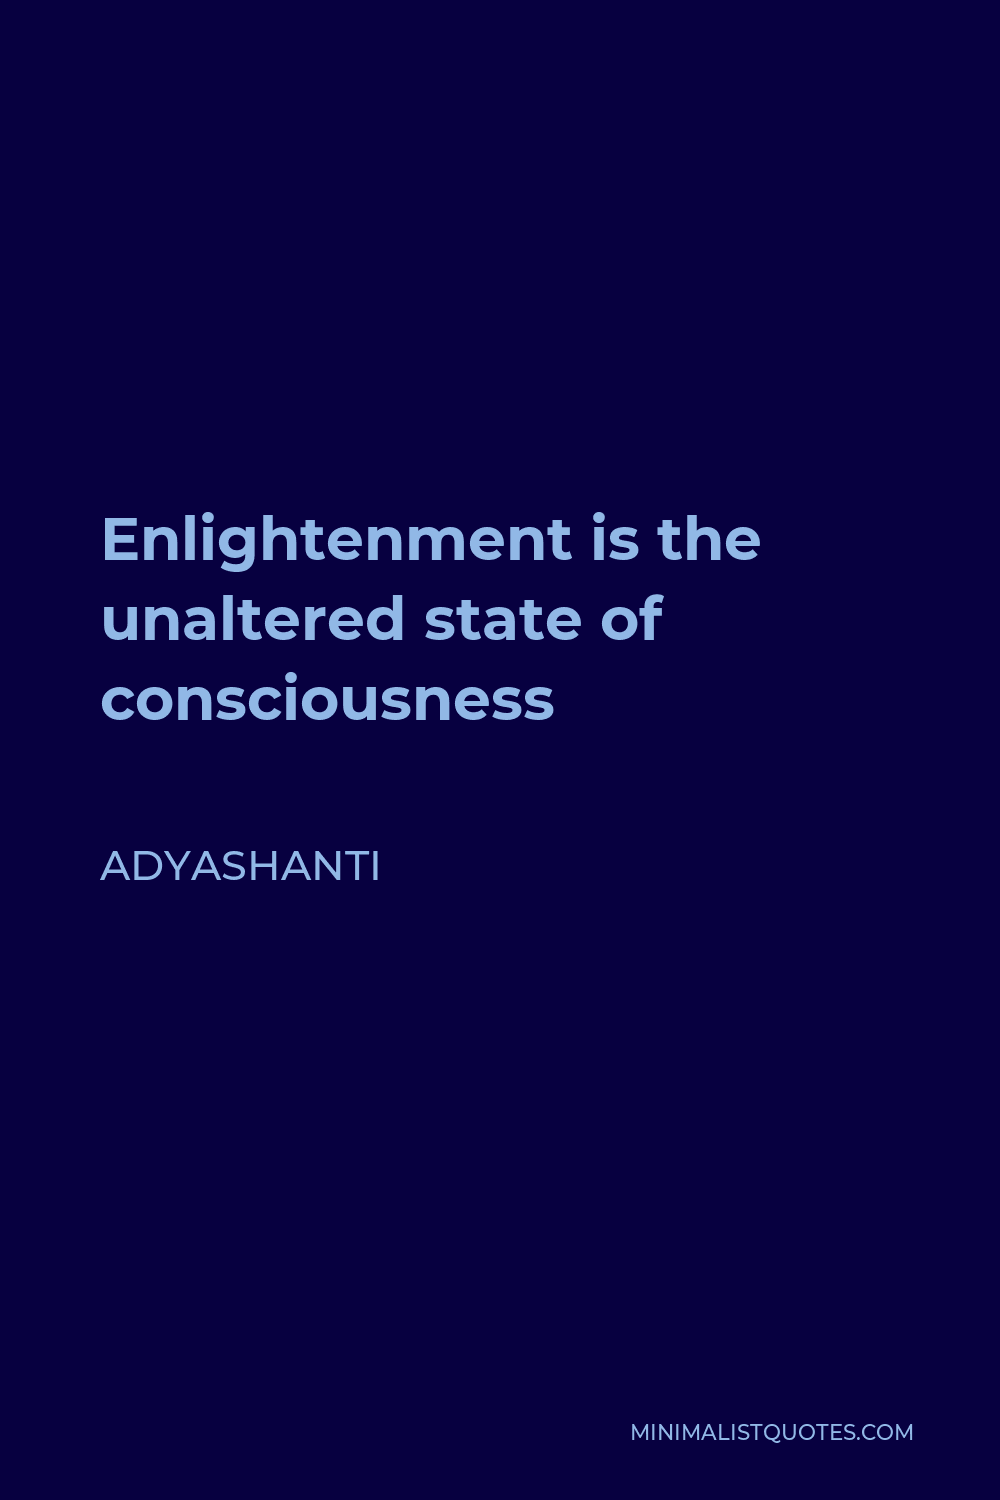 Adyashanti Quote - Enlightenment is the unaltered state of consciousness